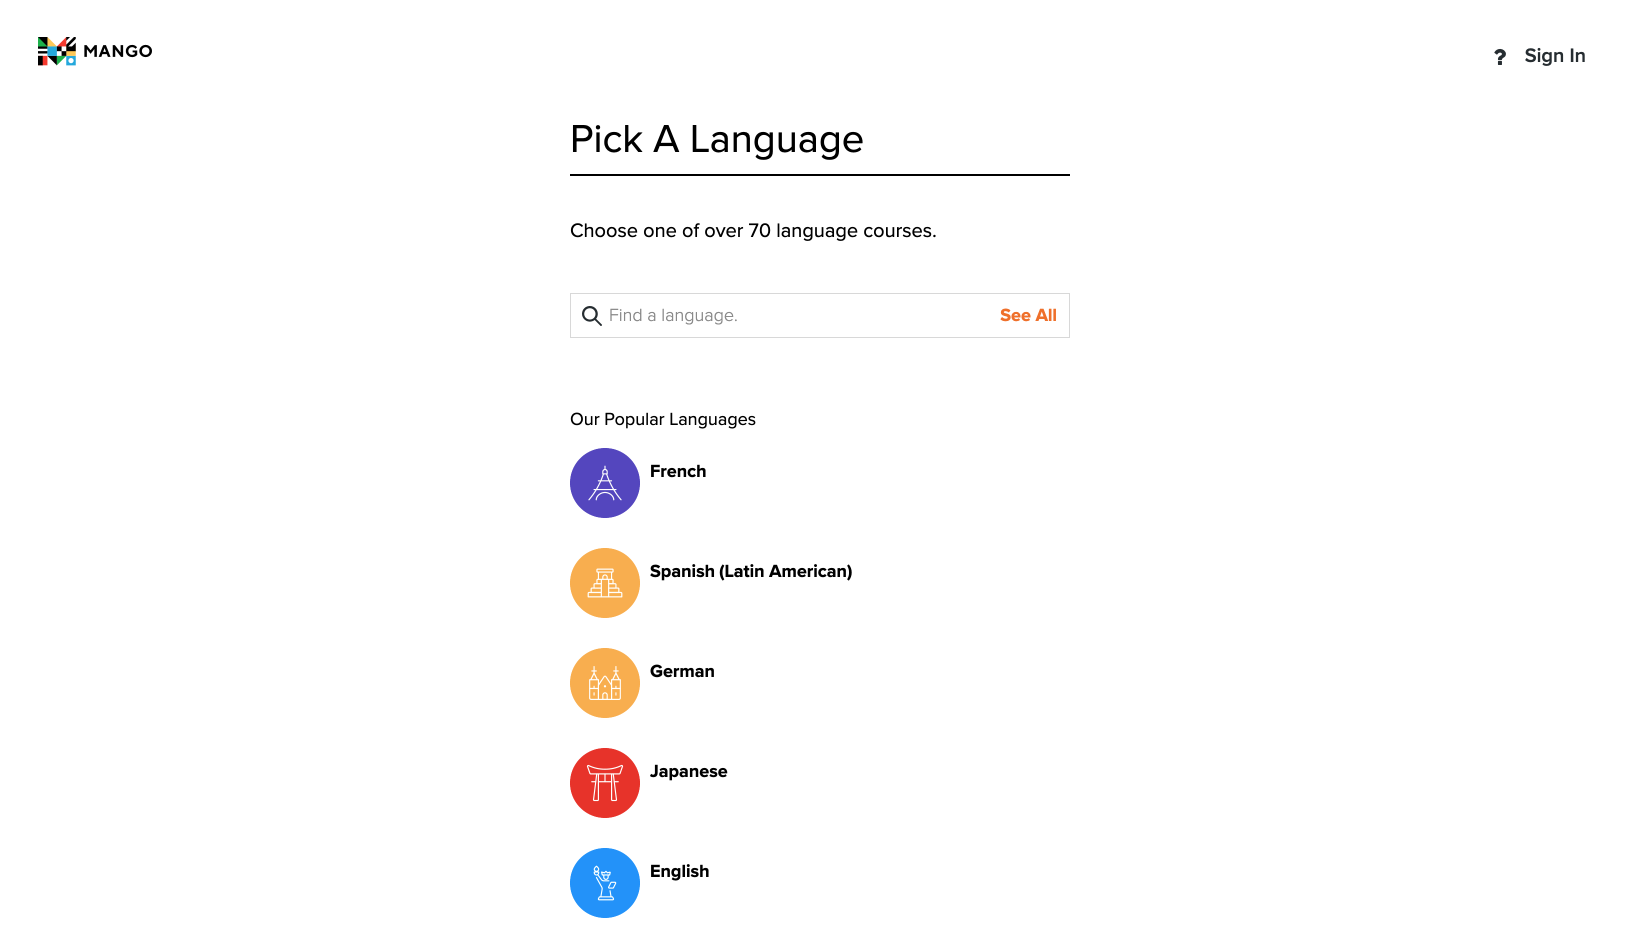 Several icons reveal the different language courses available for selection